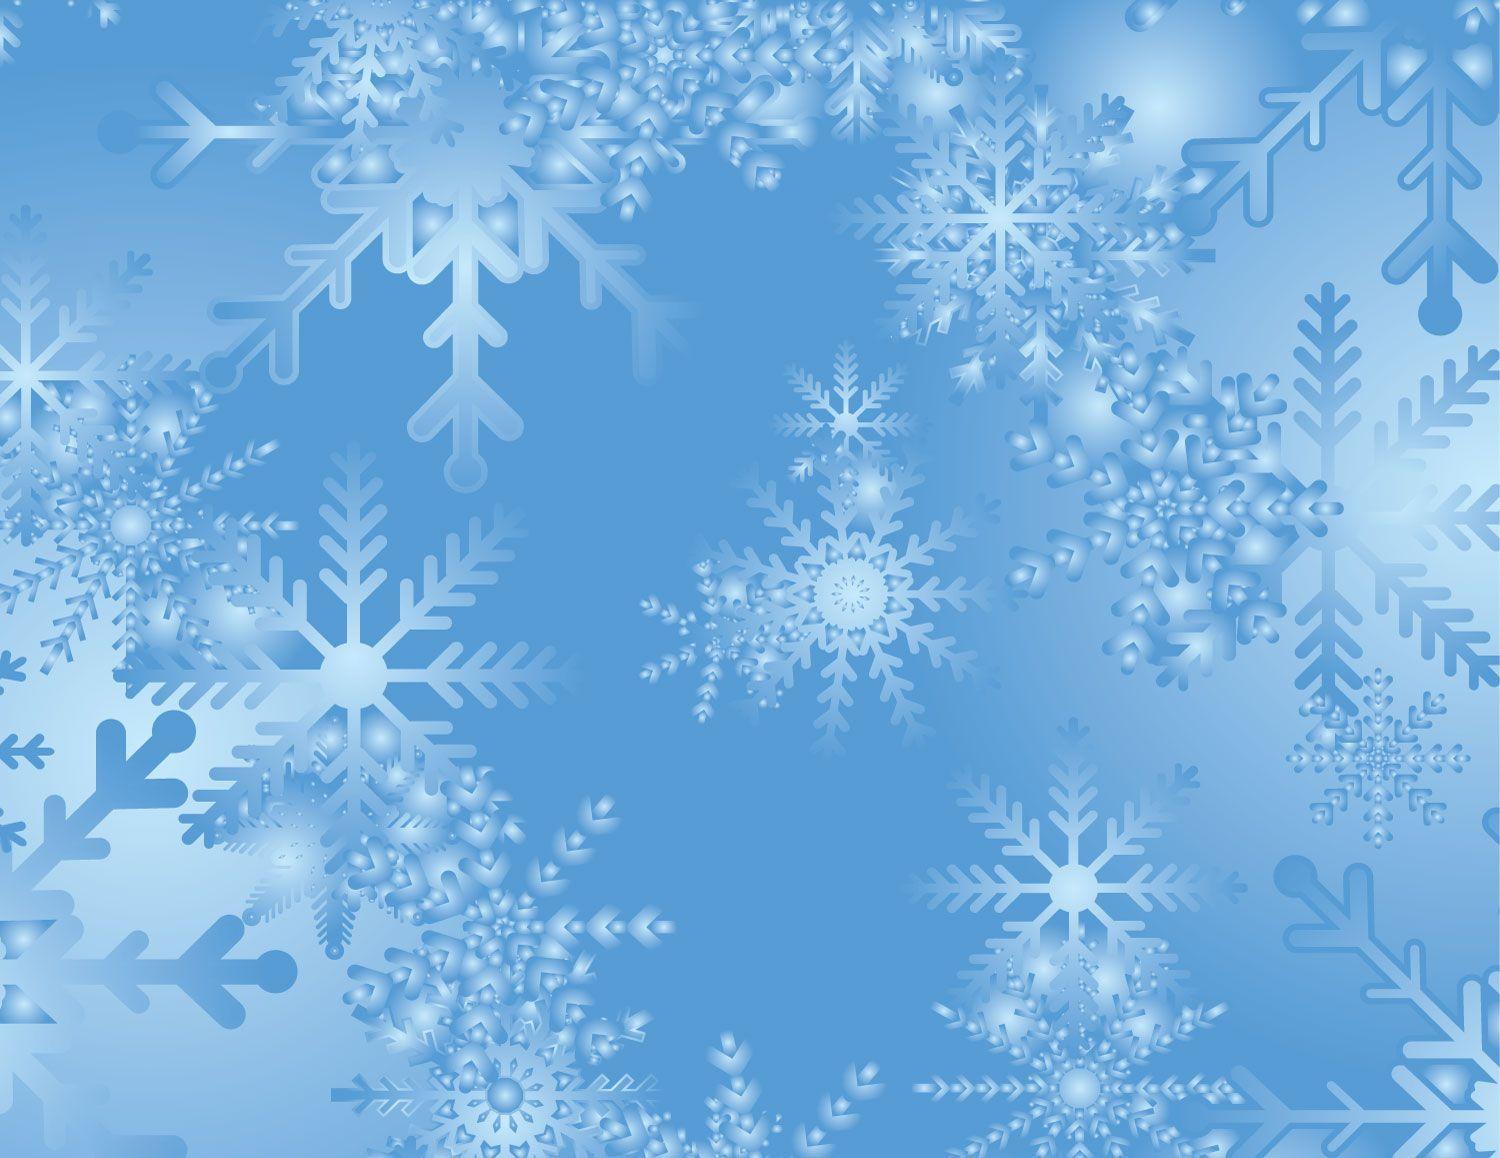 Snow Flake Backgrounds - Wallpaper Cave